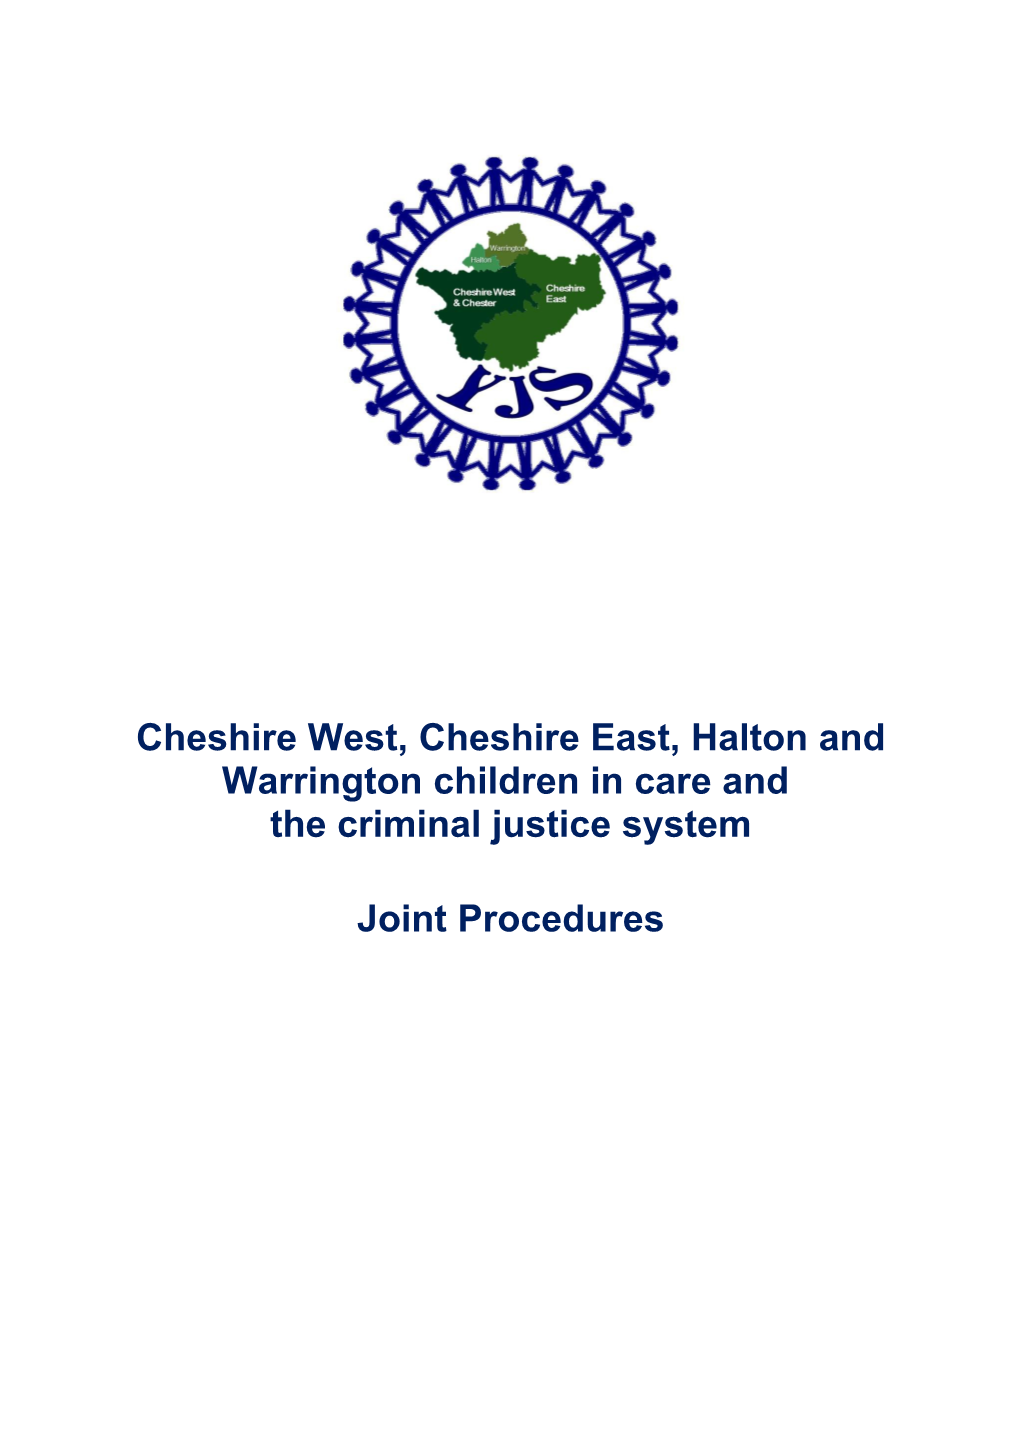 Cheshire West, Cheshire East, Halton and Warrington Children in Care and the Criminal